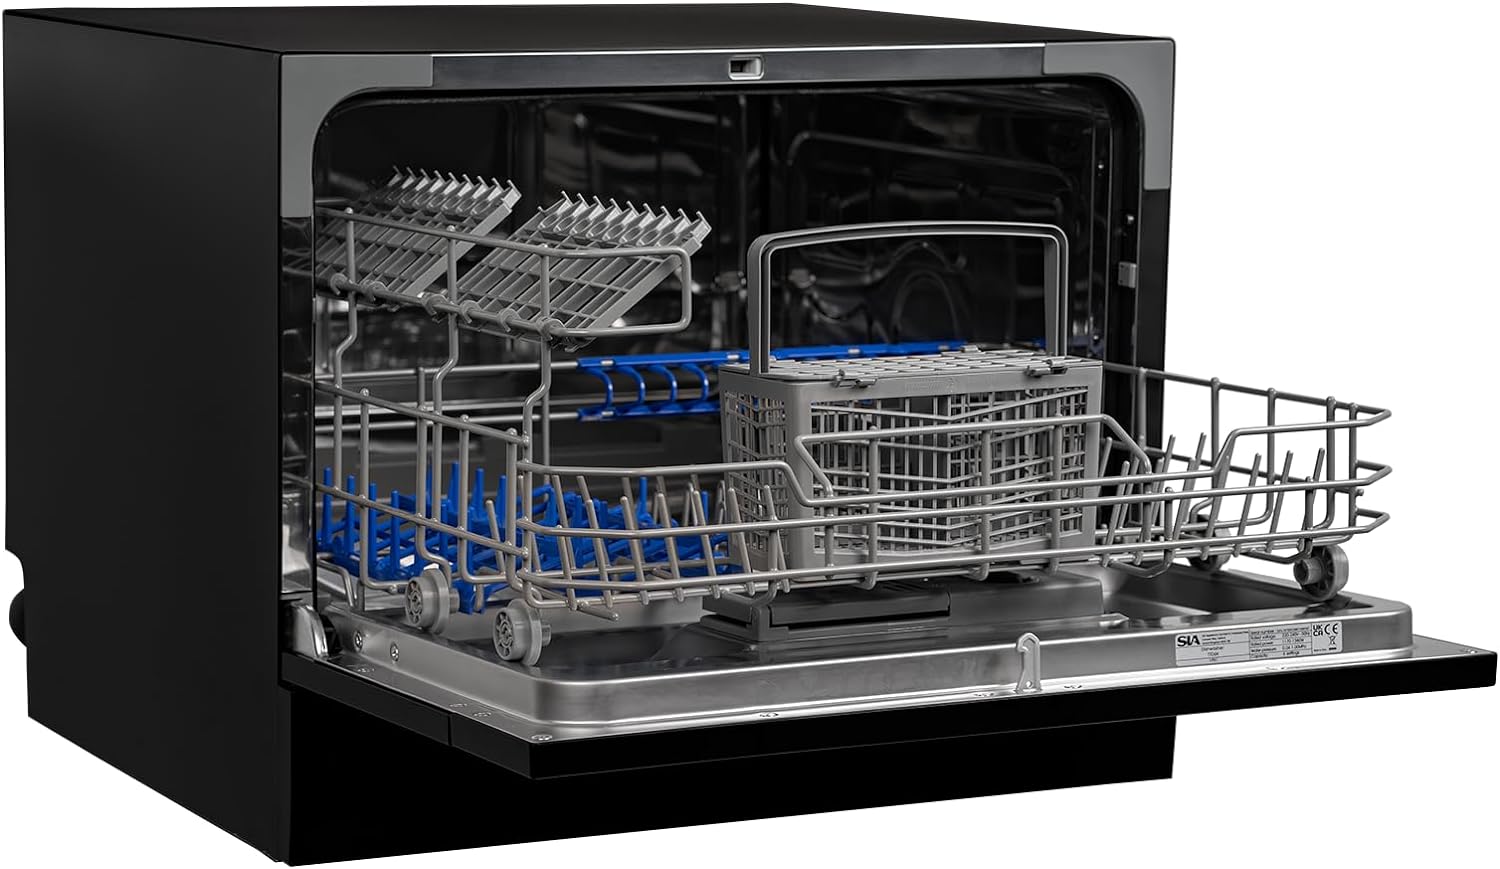 Table Top Dishwasher In Black, 6 Places 6 Programmes LED Display 24 Hour Delay Start W55 x D50 x H43.8cm - SIA TTD6K - Amazing Gadgets Outlet